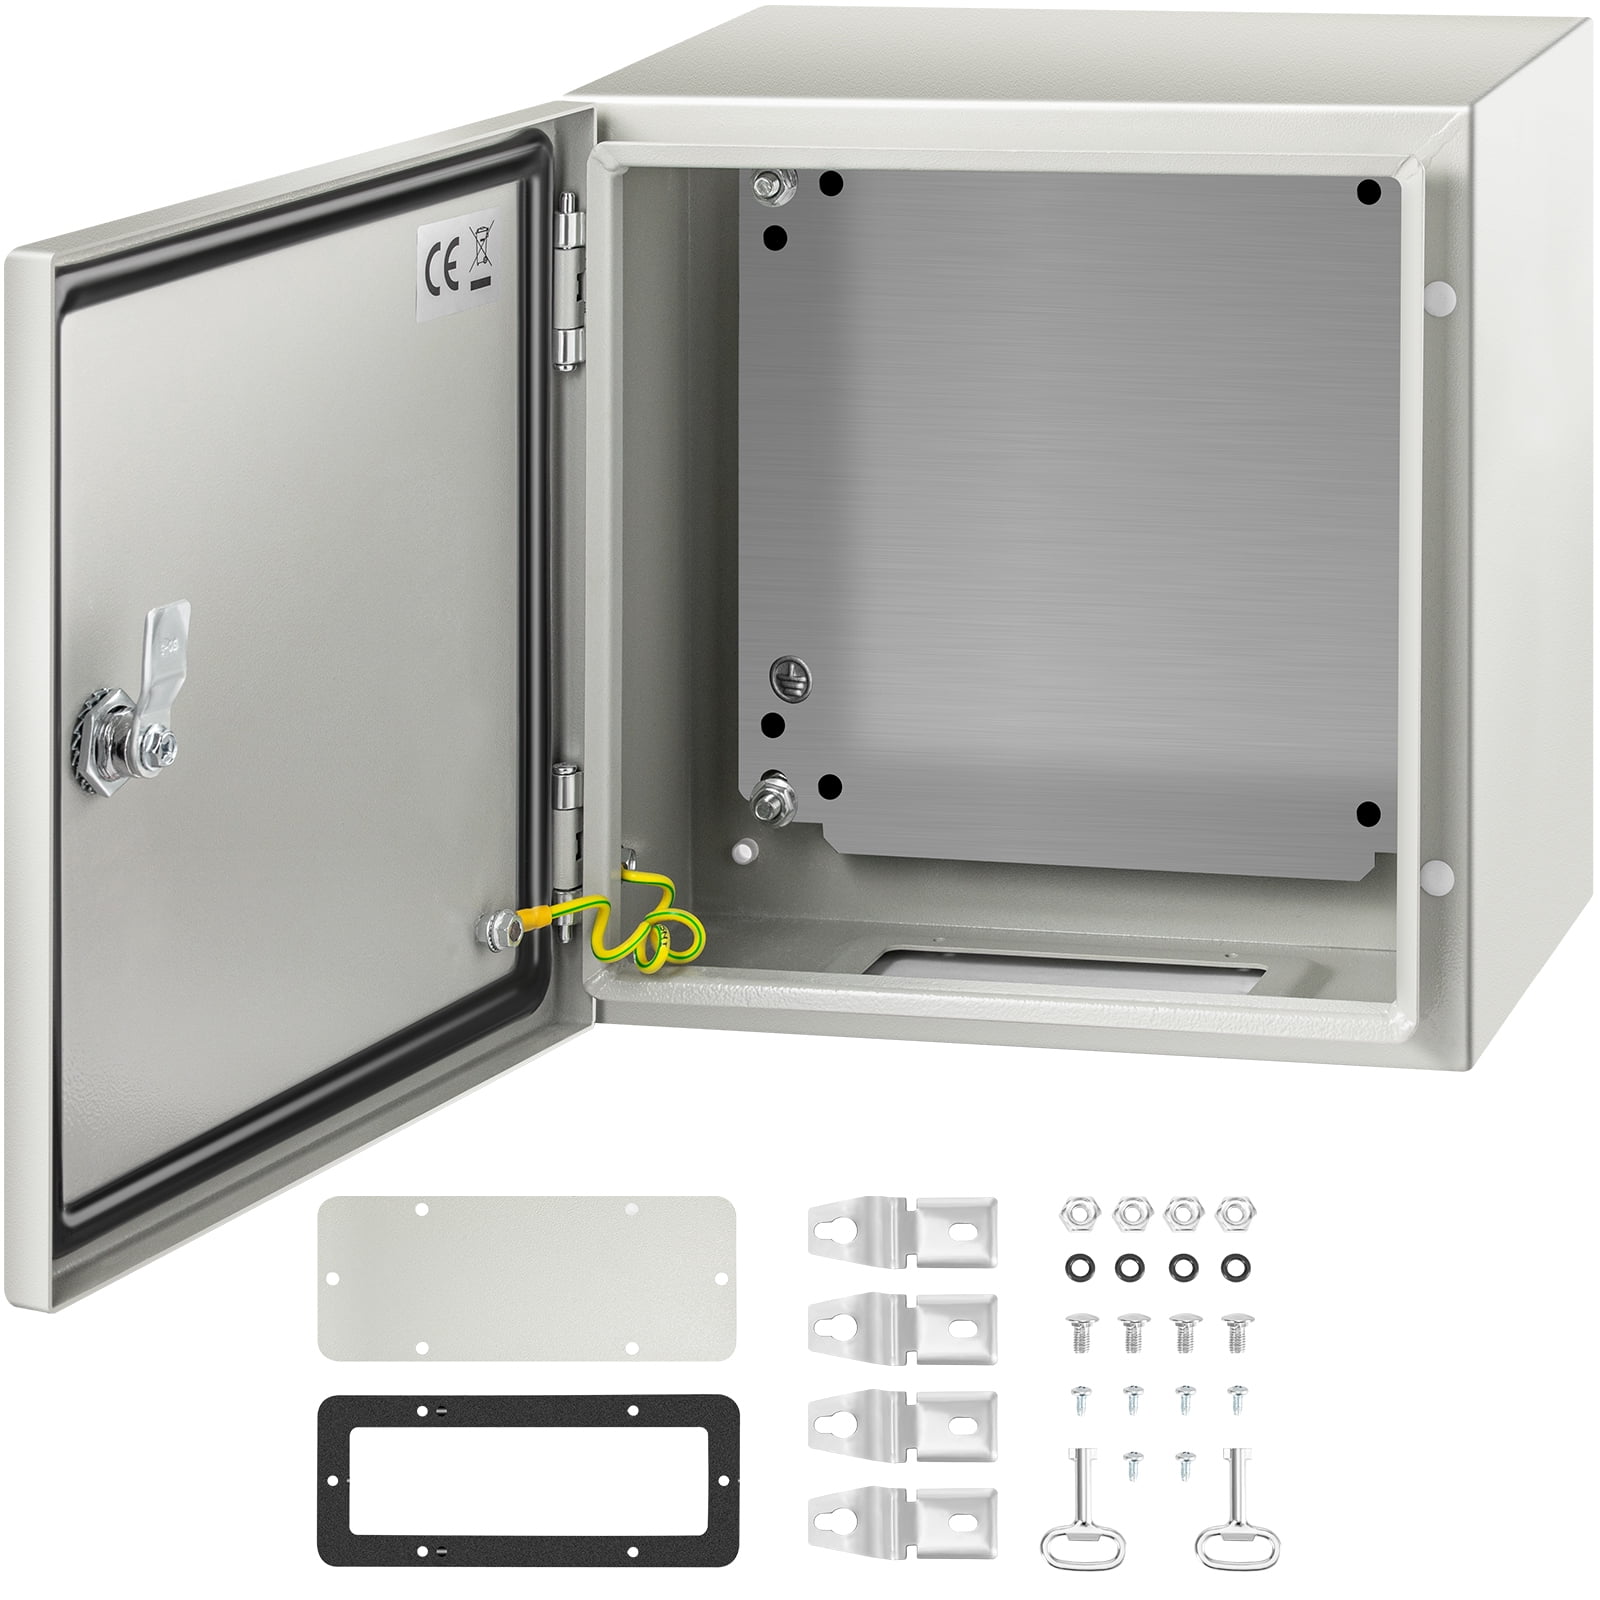 Details about   ONT-E88X 12x16x8" Steel Electrical Box *Back 